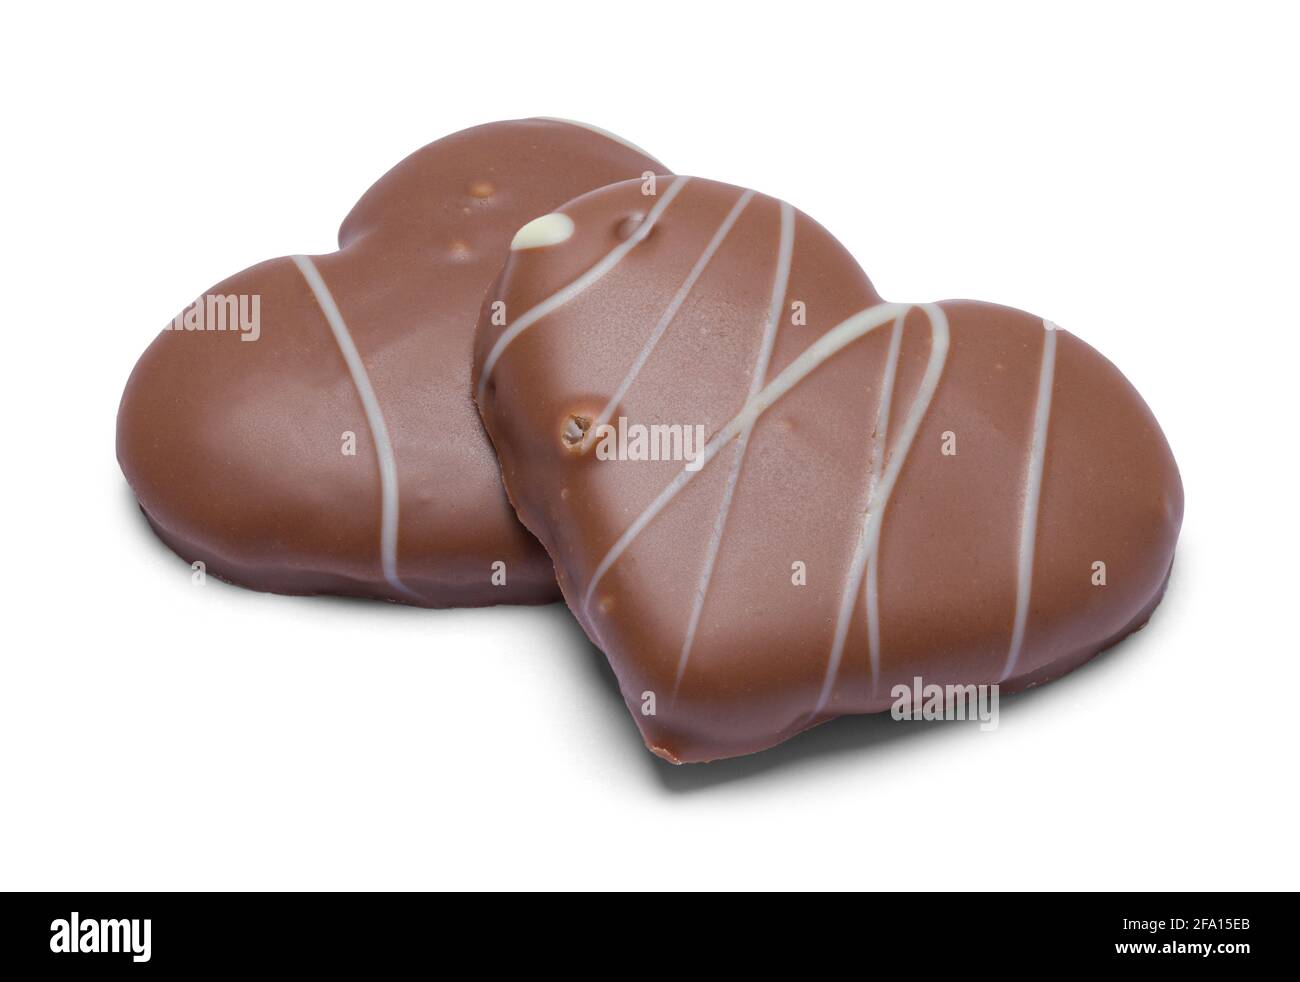 Two Chocolate Dipped Heart Shaped Shortbread Cookies Cuot Out. Stock Photo